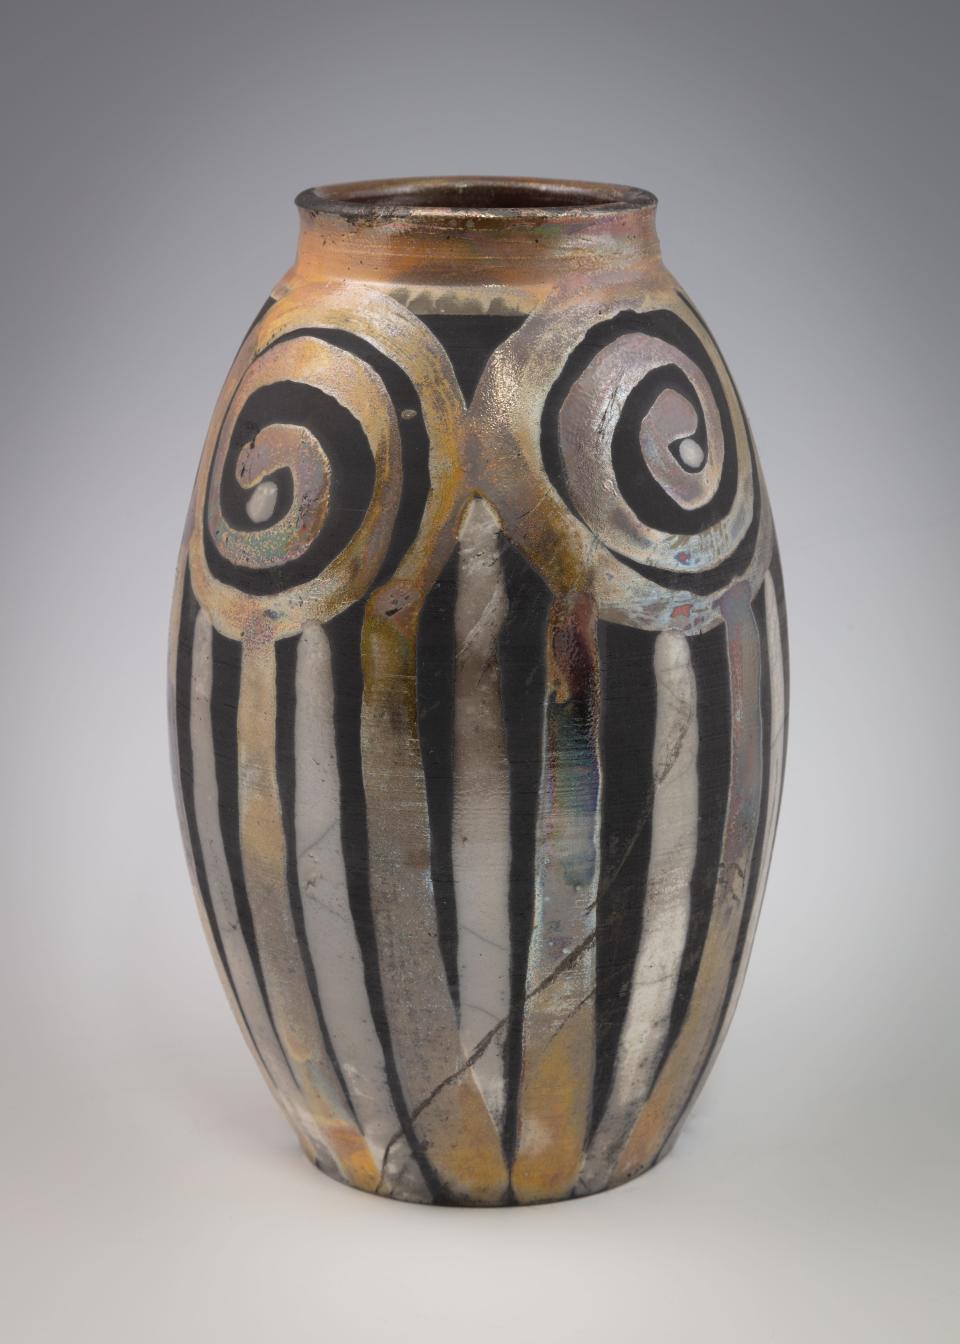 "Spiral Lift" by Diane Heart is part of the “Terra Form: A Cape Cod Potters Juried Exhibition” at Cape Cod Museum of Art.